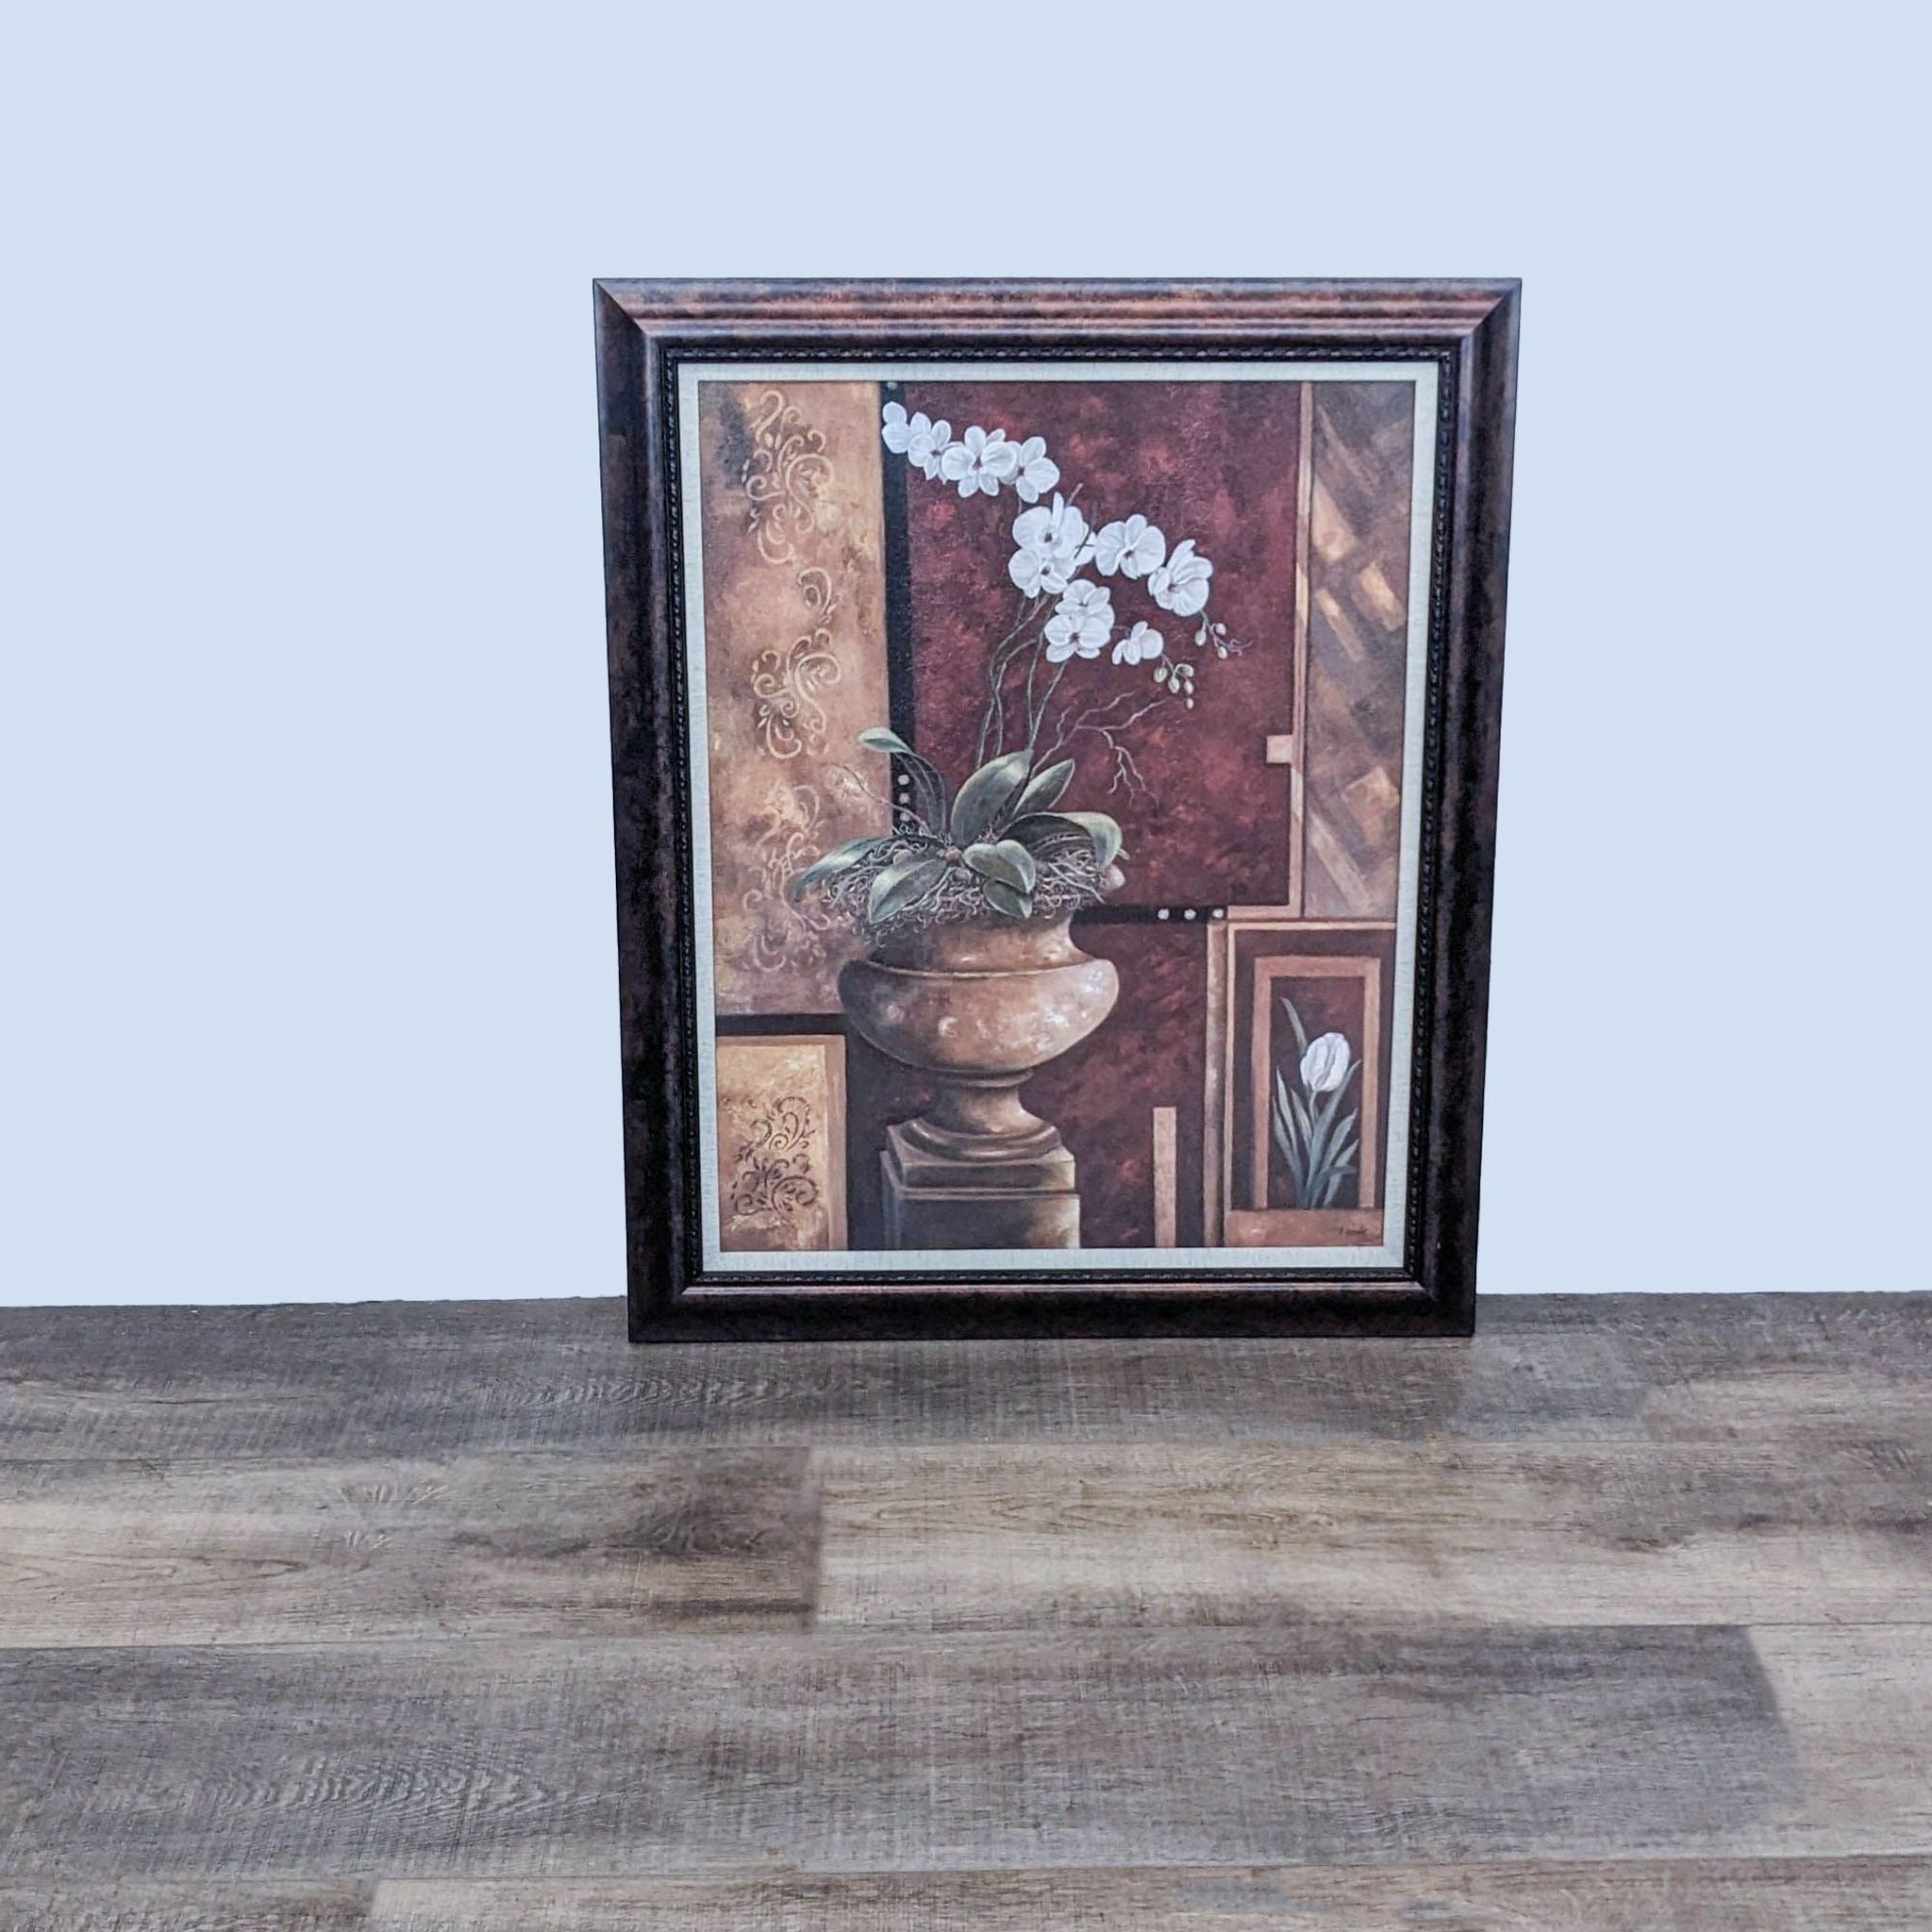 Reperch branded art print featuring a floral arrangement in a vase with ornate details, framed and displayed on a wooden floor.